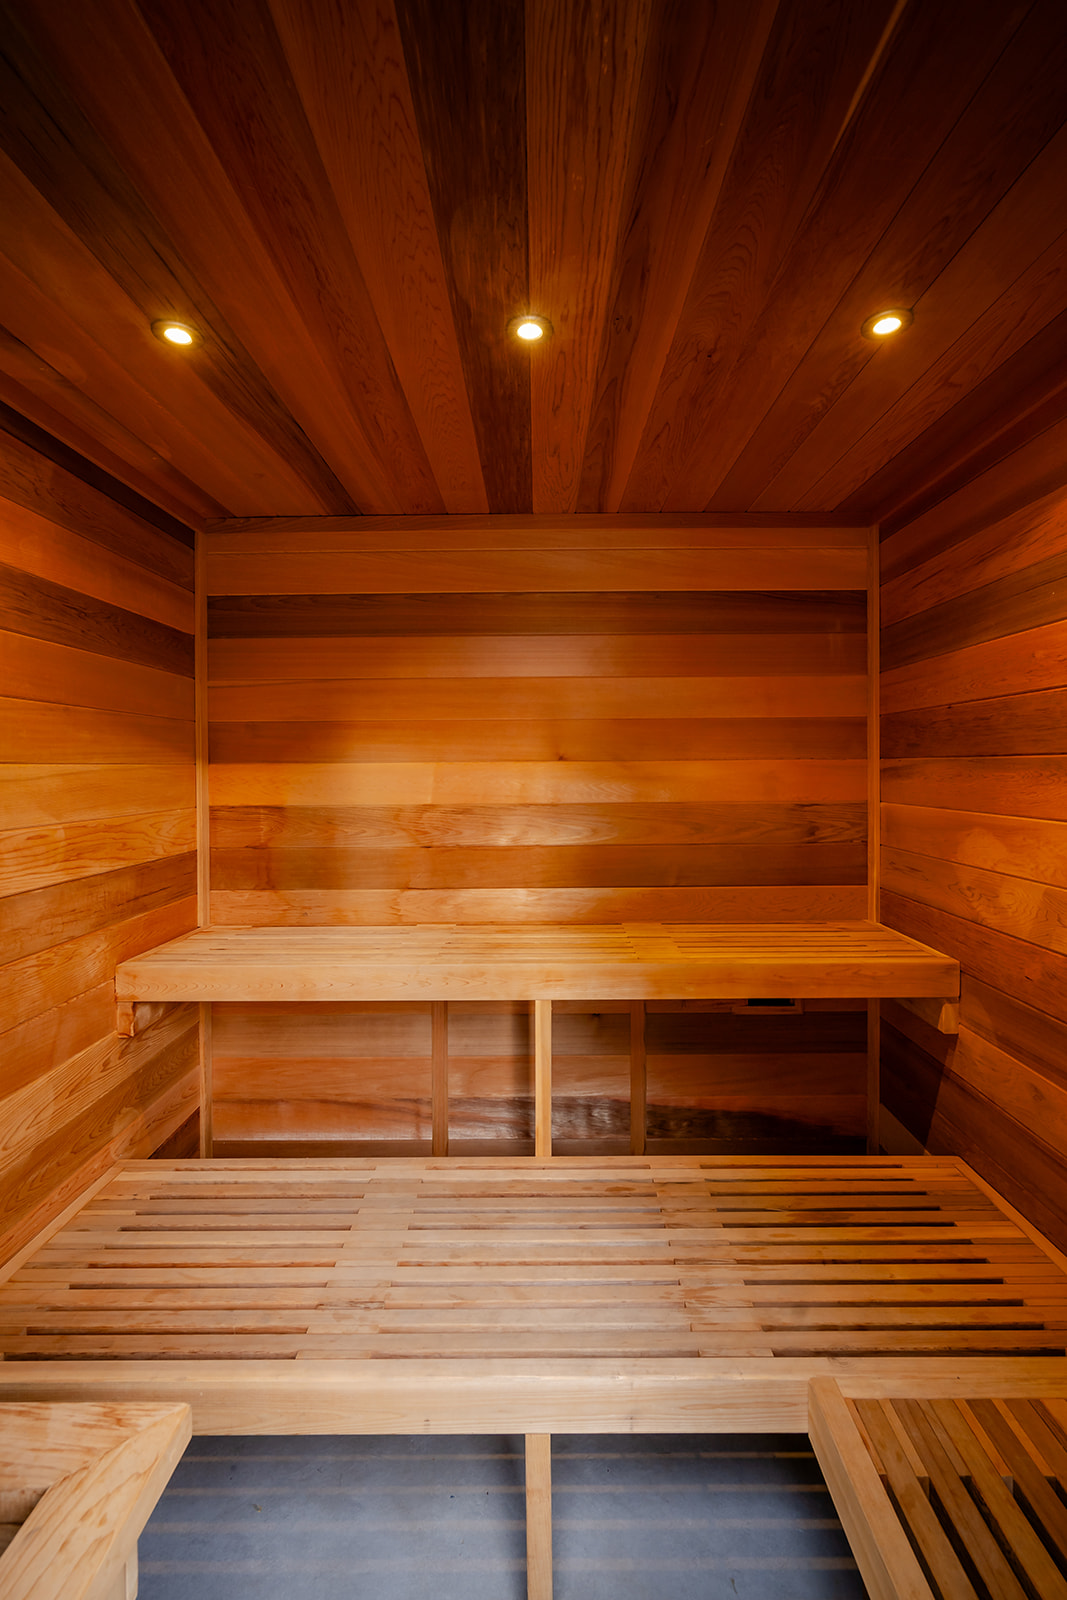 Wooden benches built in the sauna.